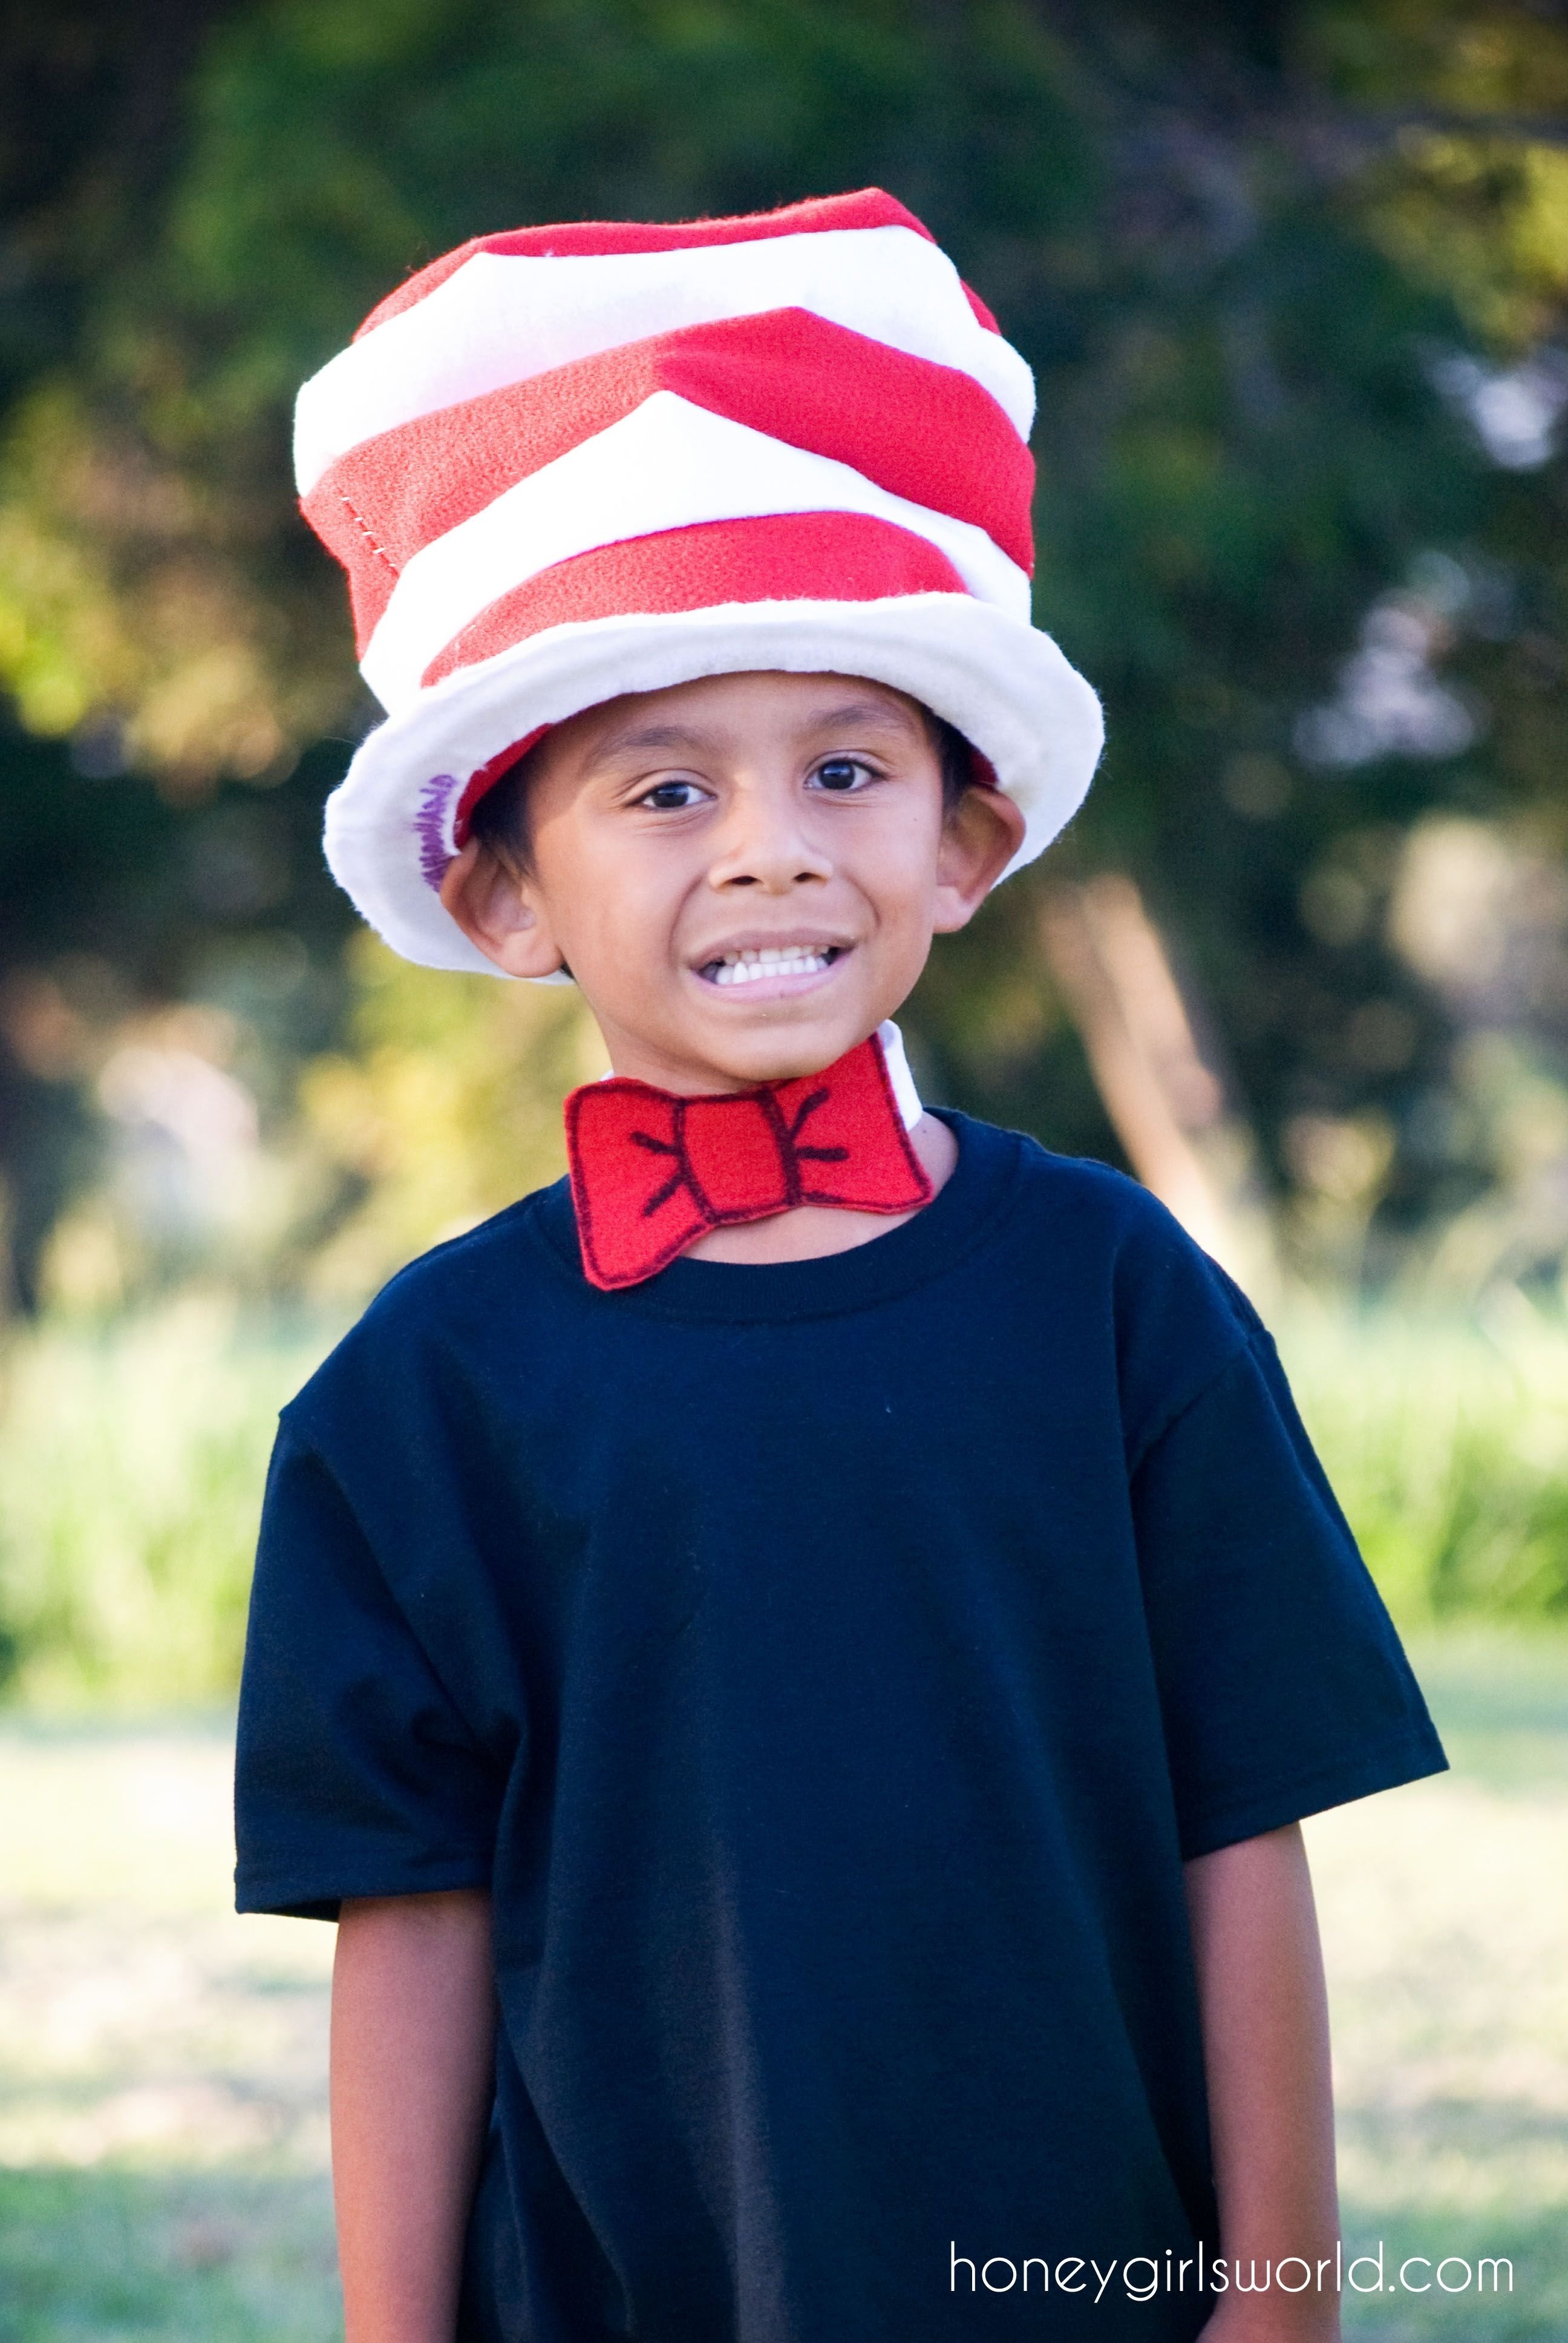 10 Best Dr Seuss Characters Costume Ideas book character dress up day easy diy dr seuss cat in the hat and 1 2022